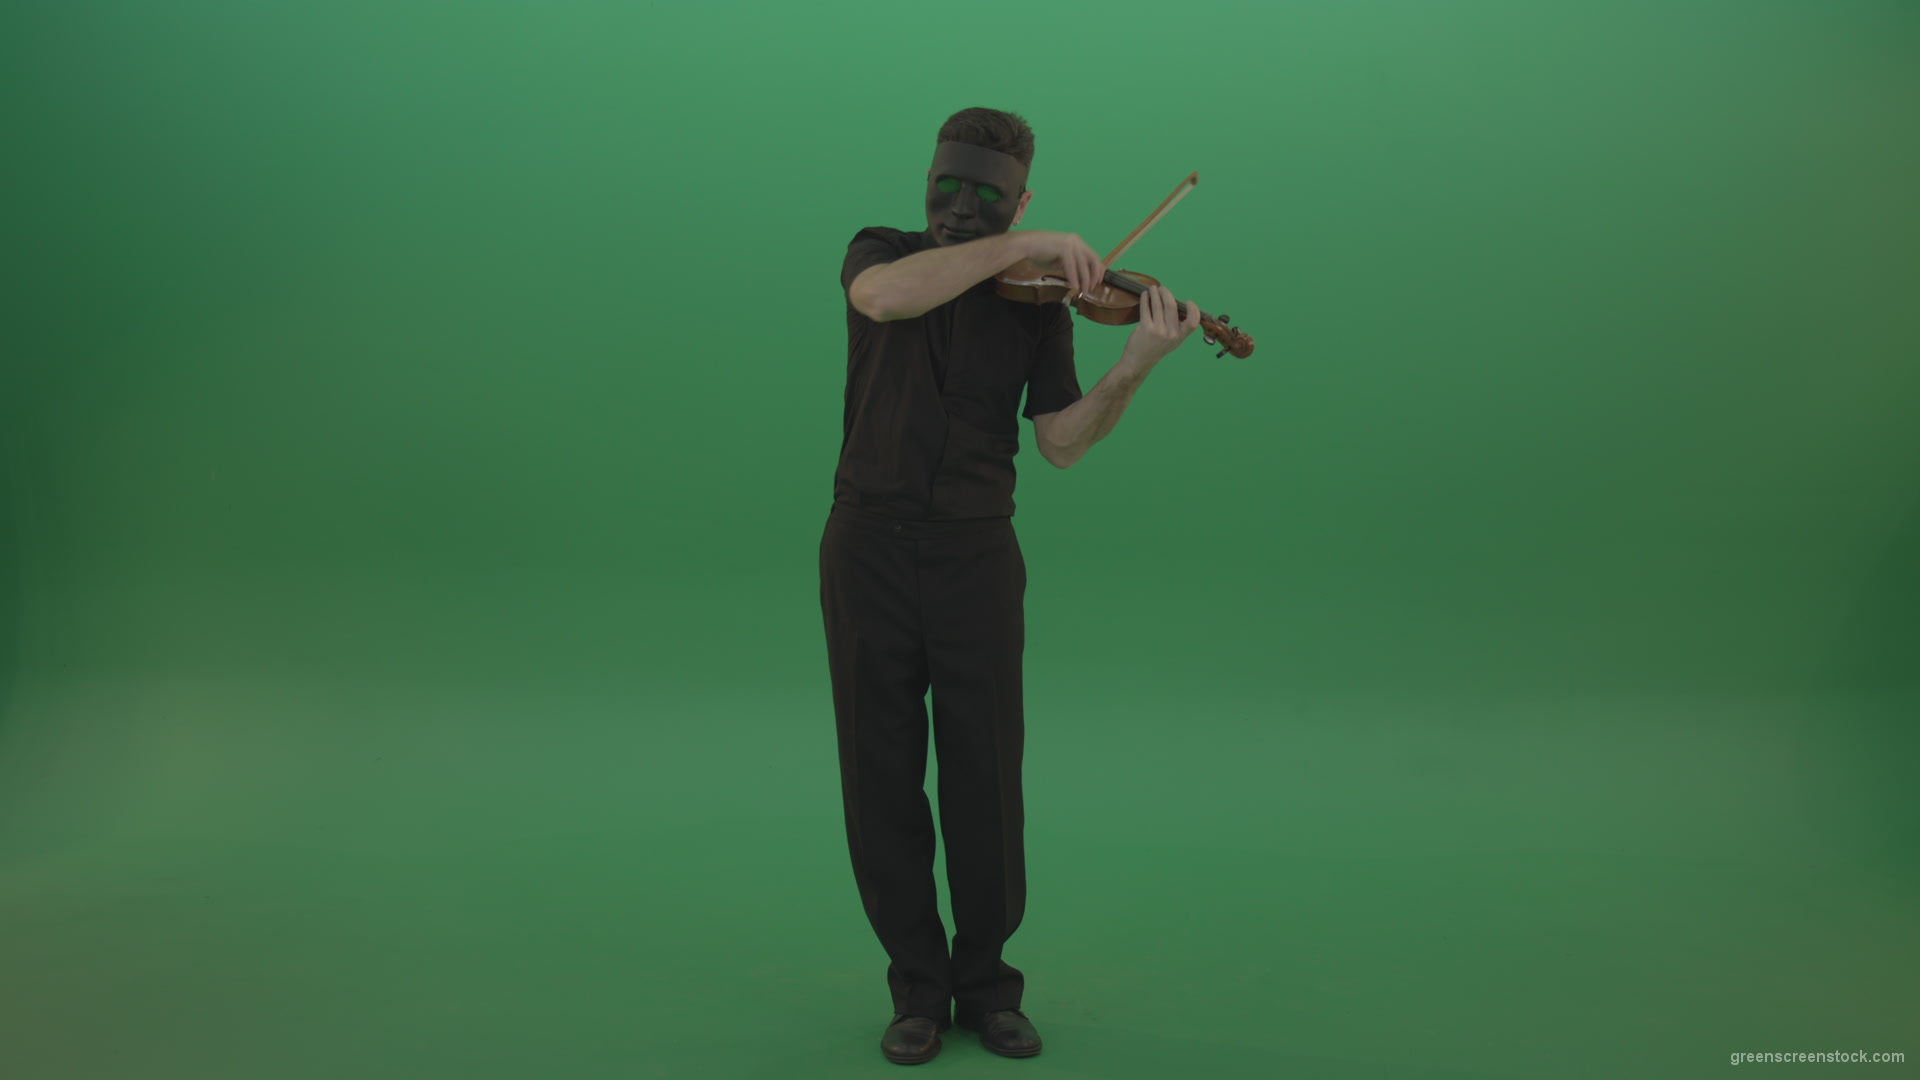 Full-height-Rock-Man-in-black-wear-and-mask-play-violin-fiddle-strings-gothic-dark-music-isolated-on-green-screen_008 Green Screen Stock